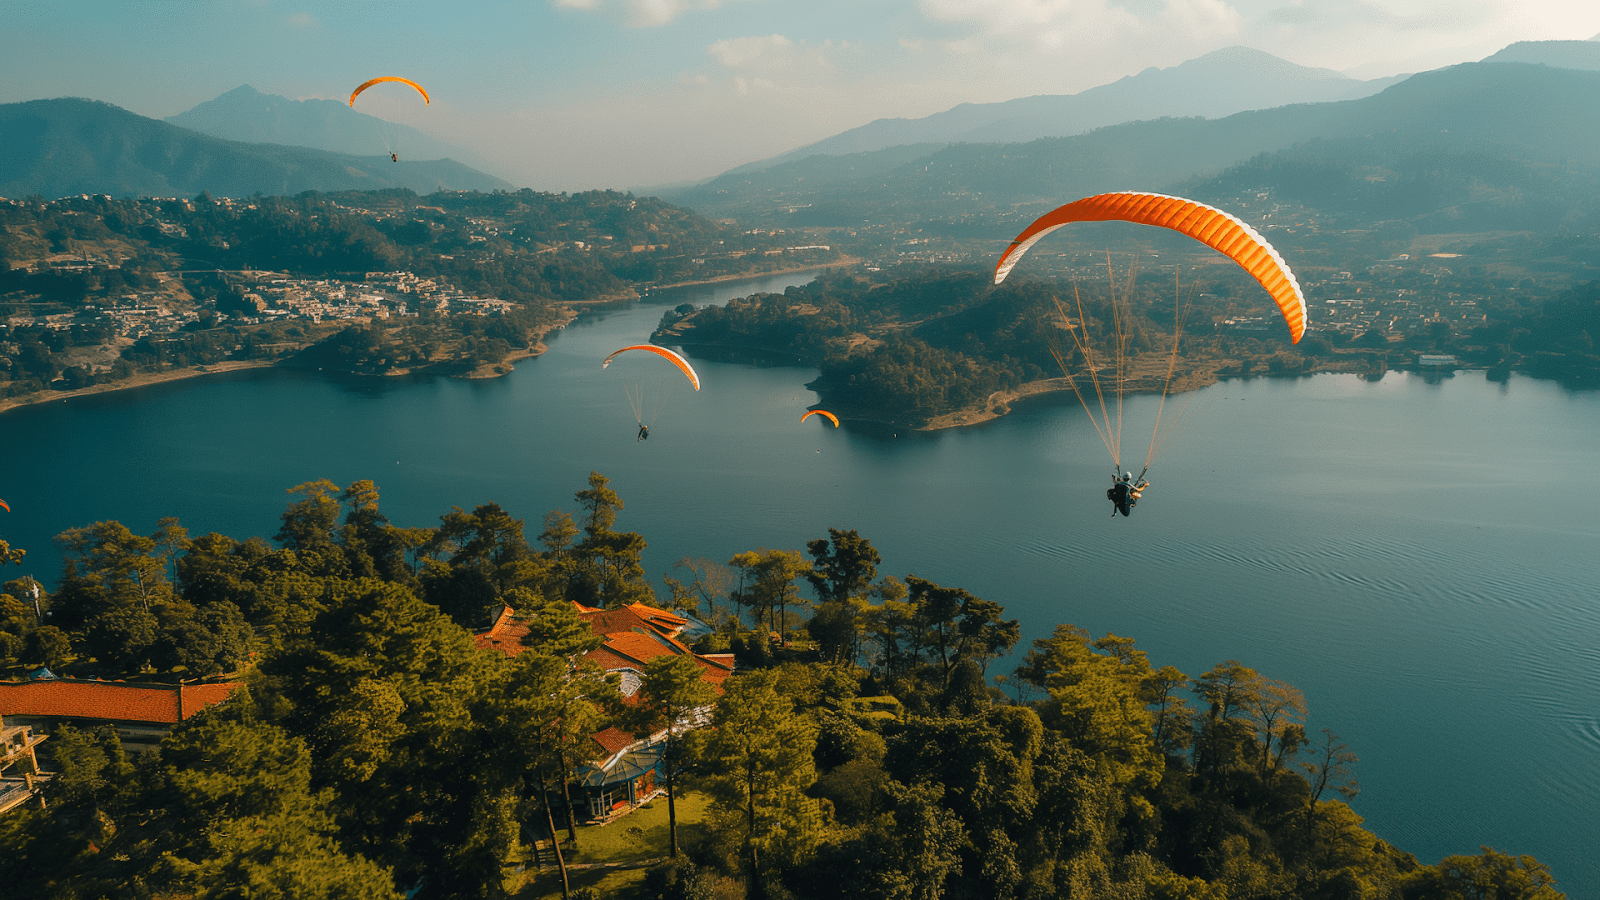 Paragliders soaring over a scenic lake near Mexico City, capturing the essence of adventure in the area